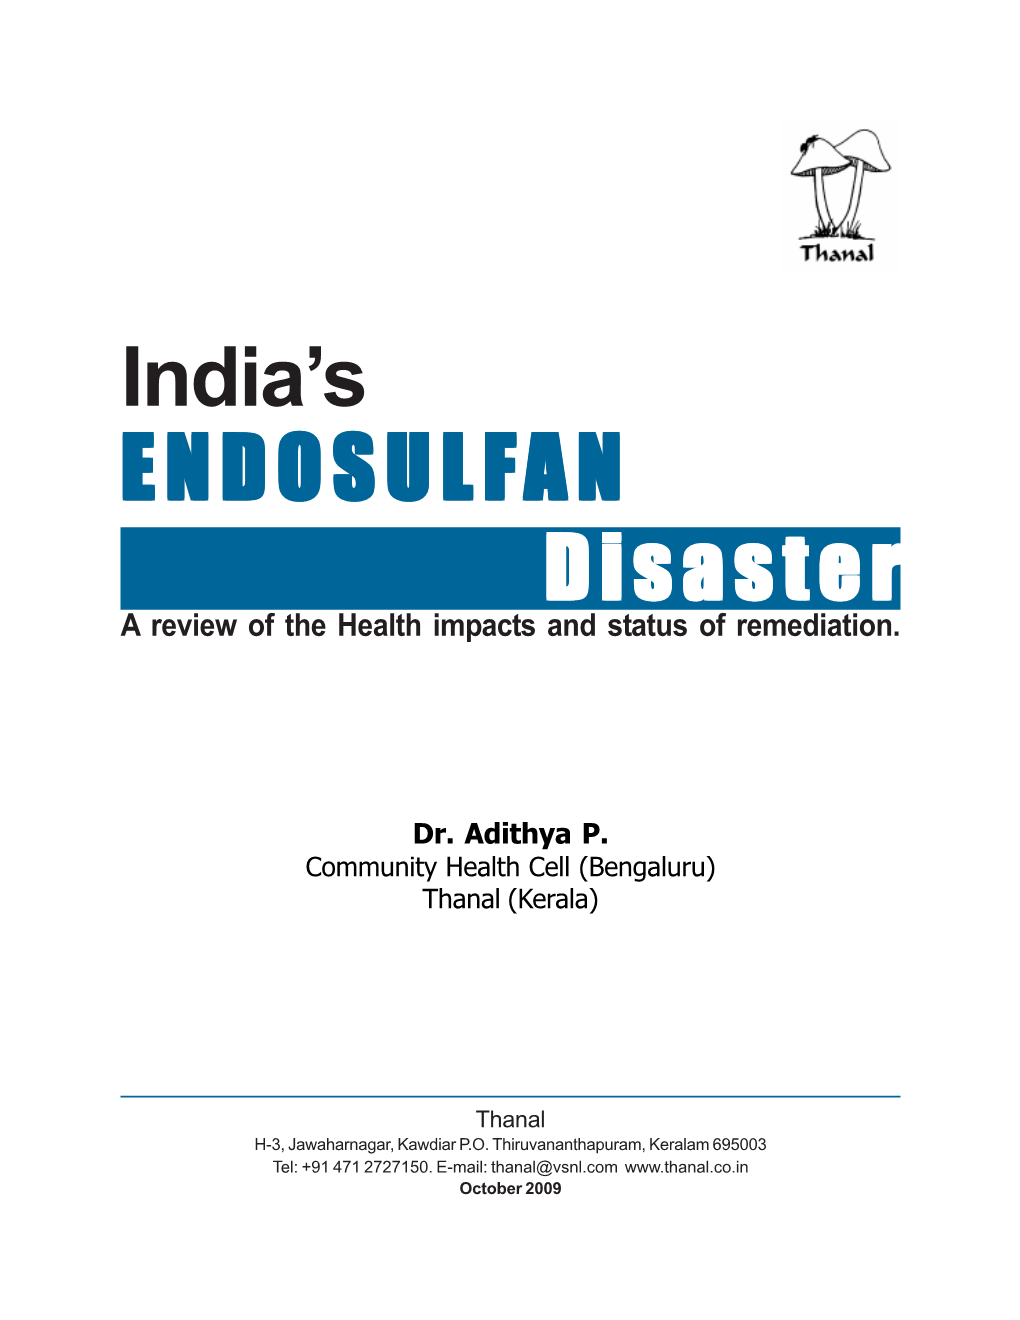 Endosulfan Disaster – a Review of the Health Impacts and Status of Remediation